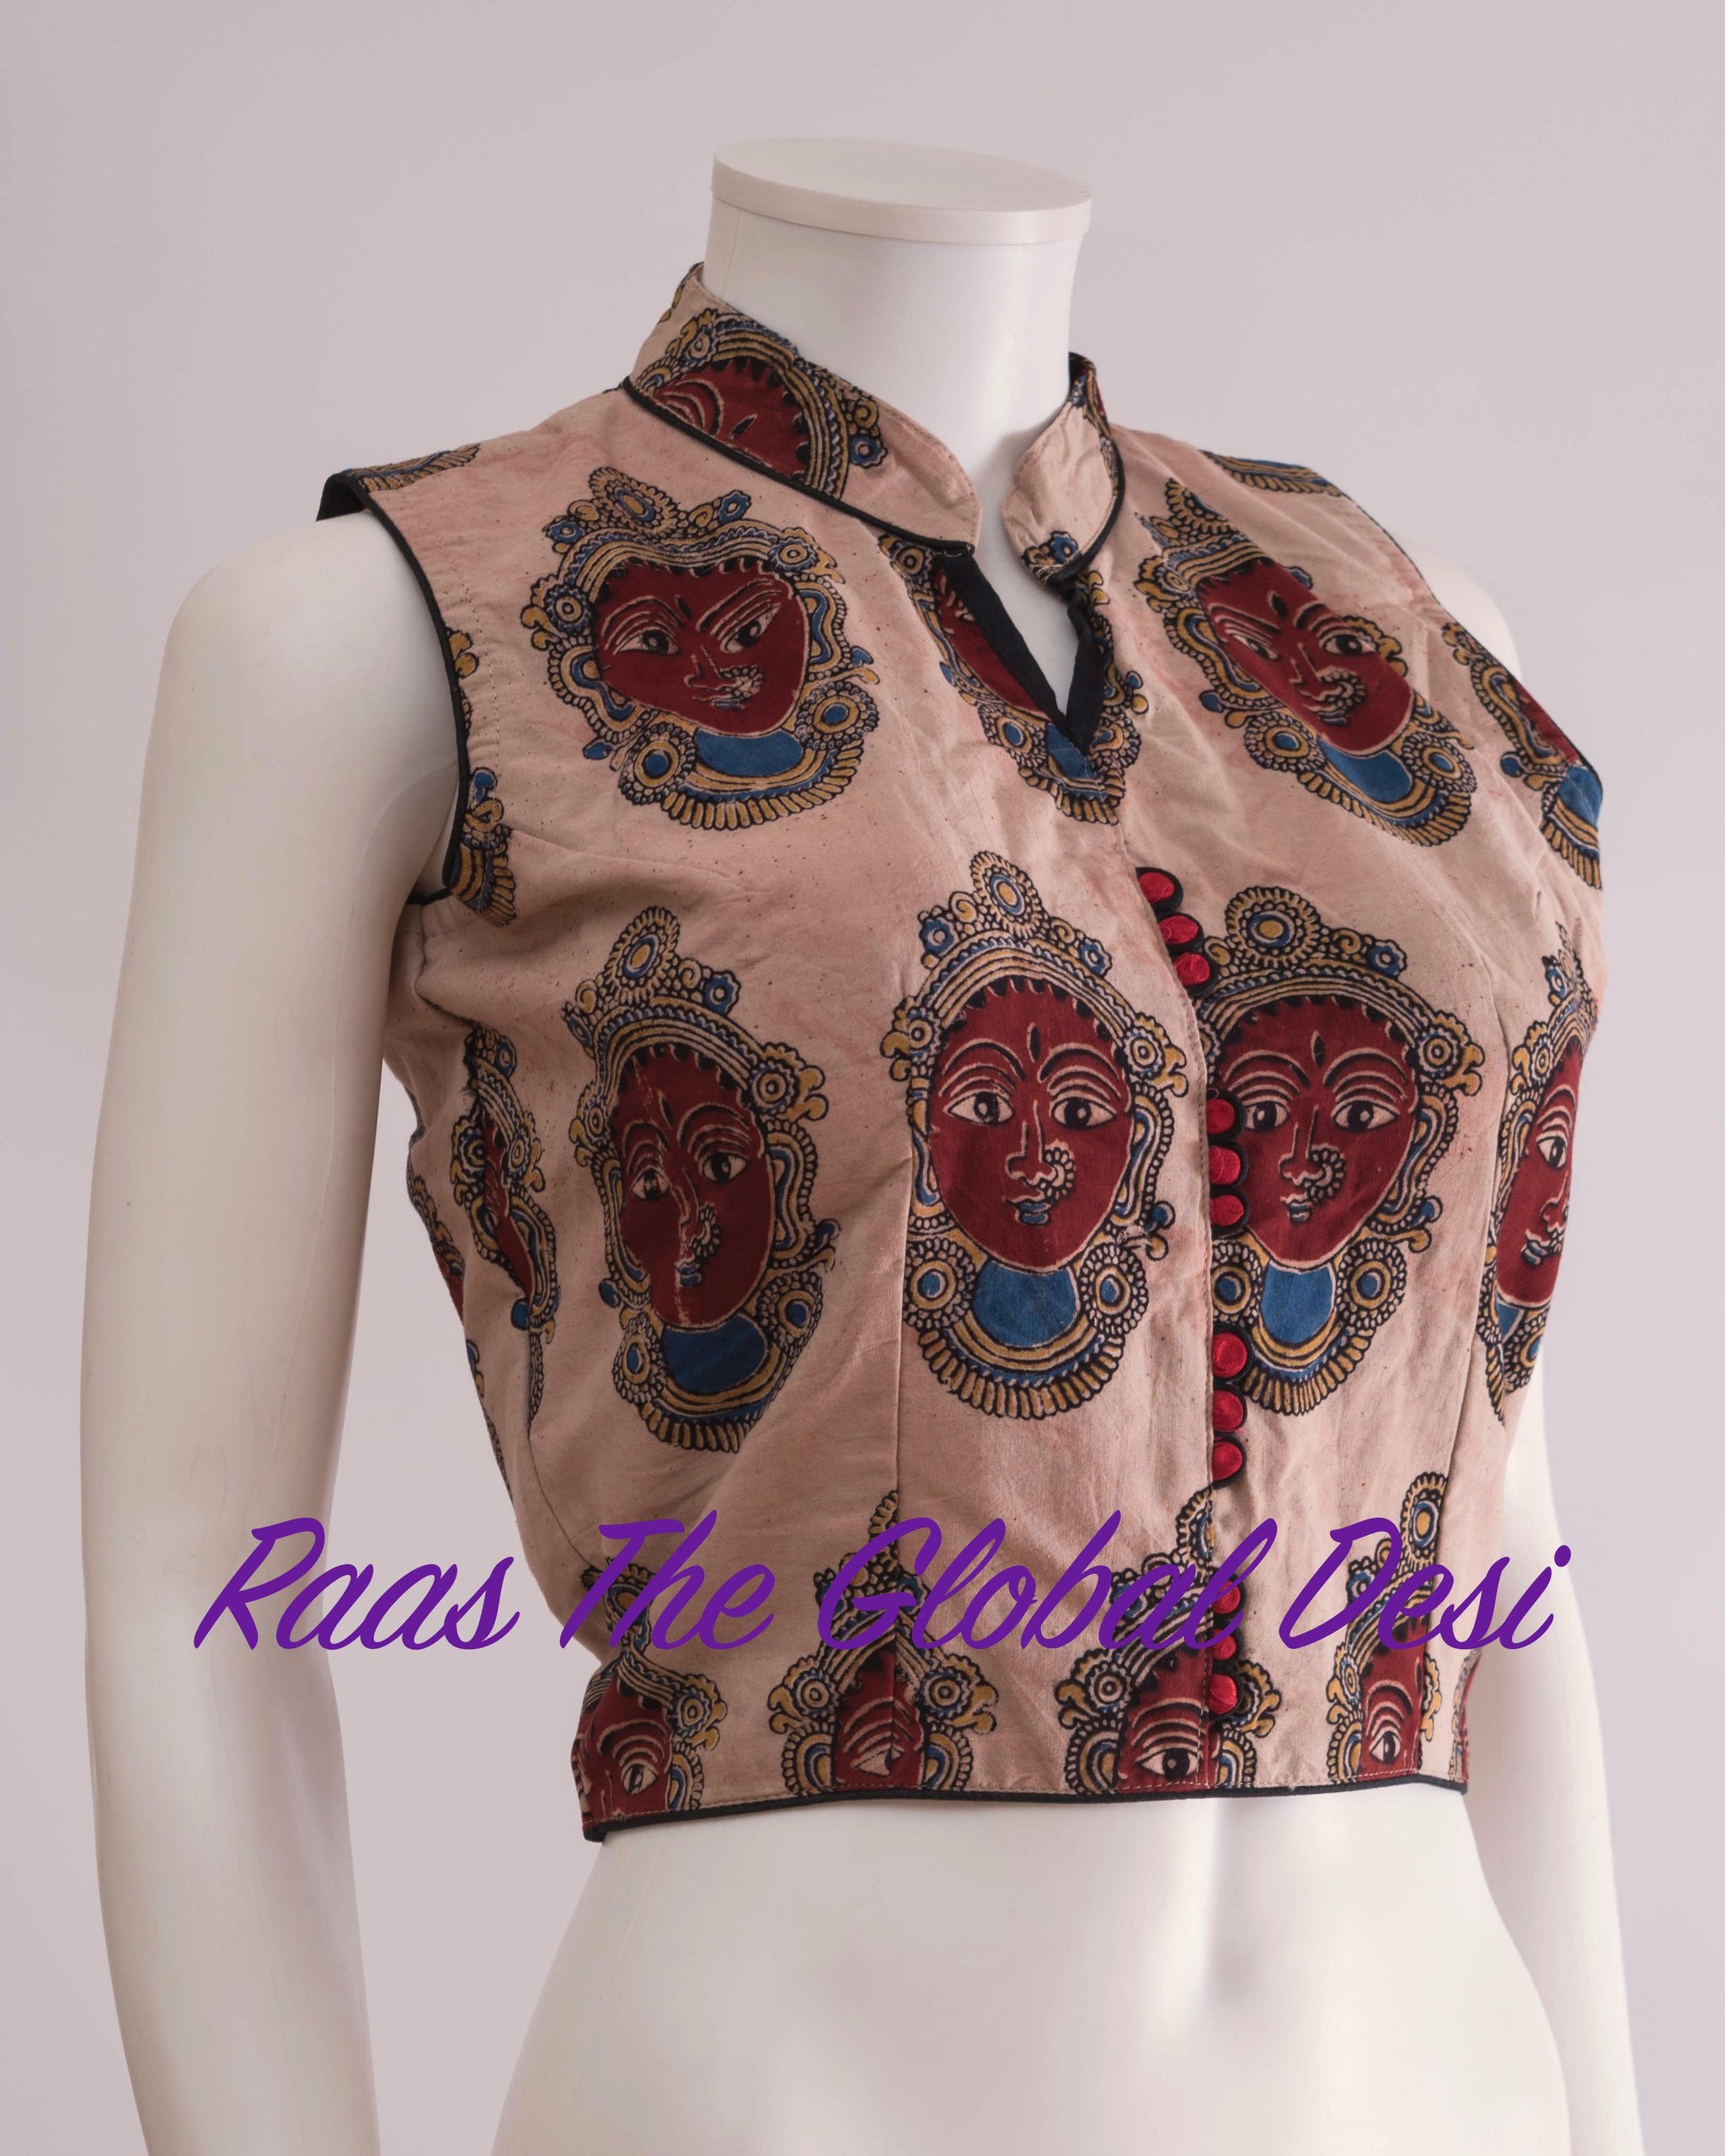 How To Take blouse Measurement For Online Shopping – Raas